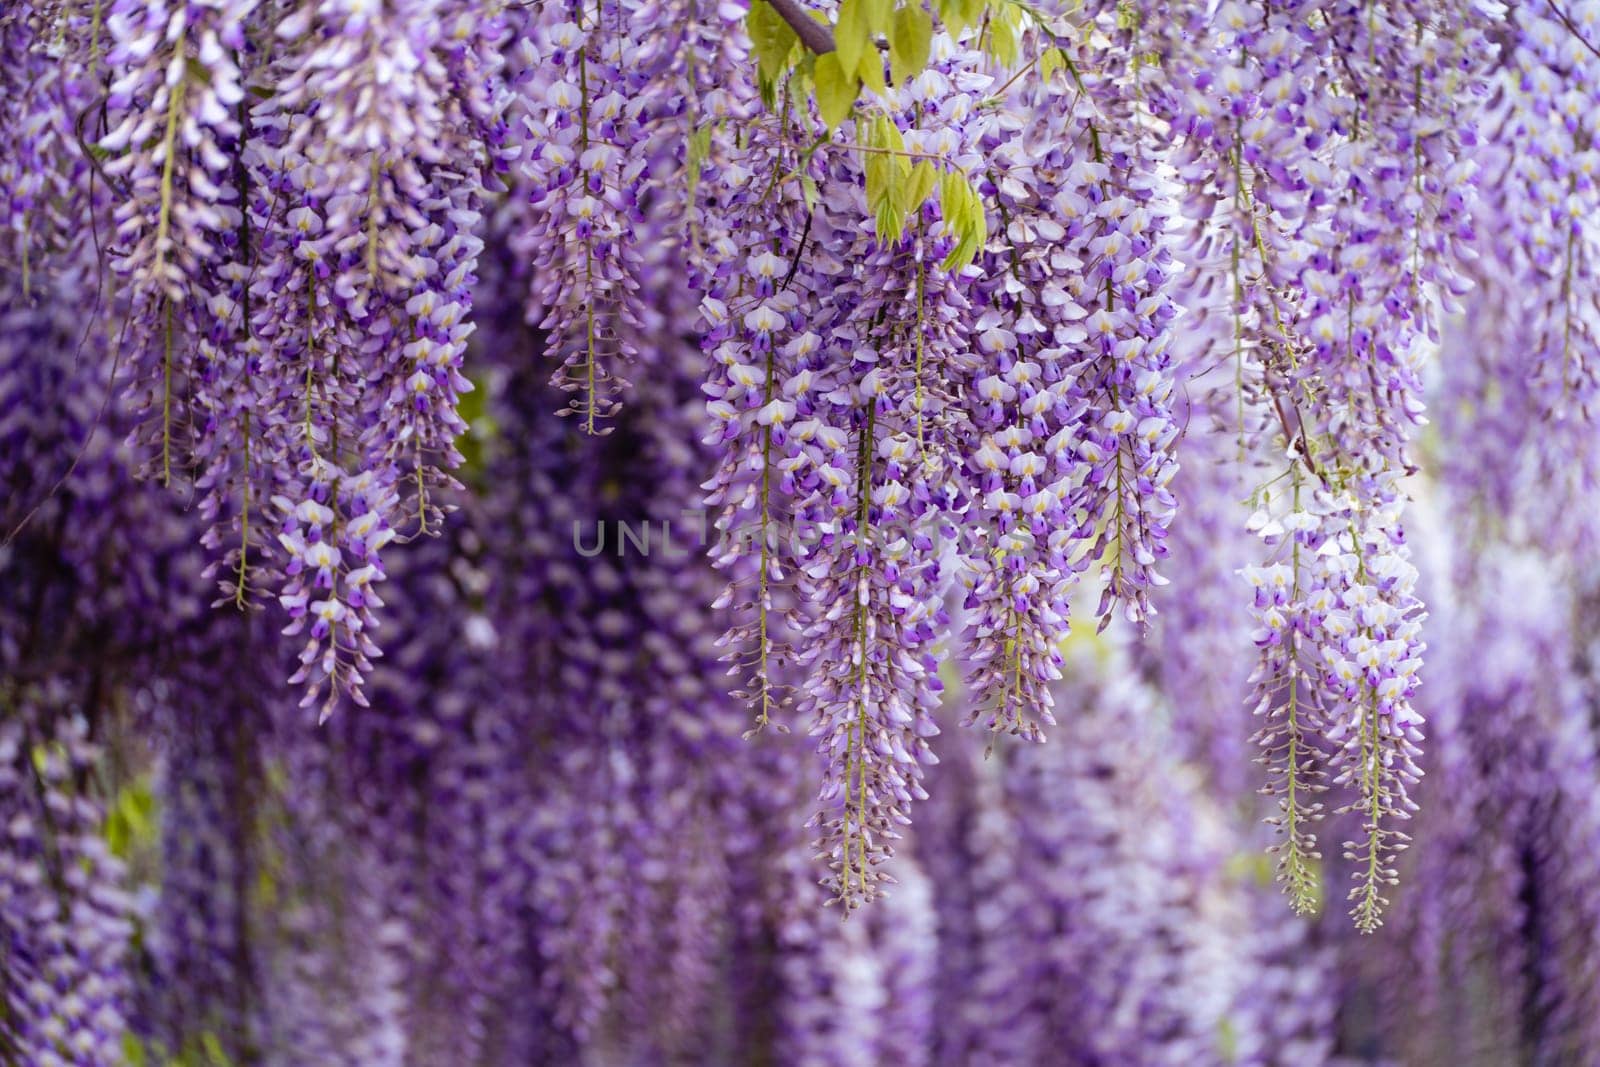 Blooming Wisteria Sinensis with scented classic purple flowersin full bloom in hanging racemes closeup. Garden with wisteria in spring.